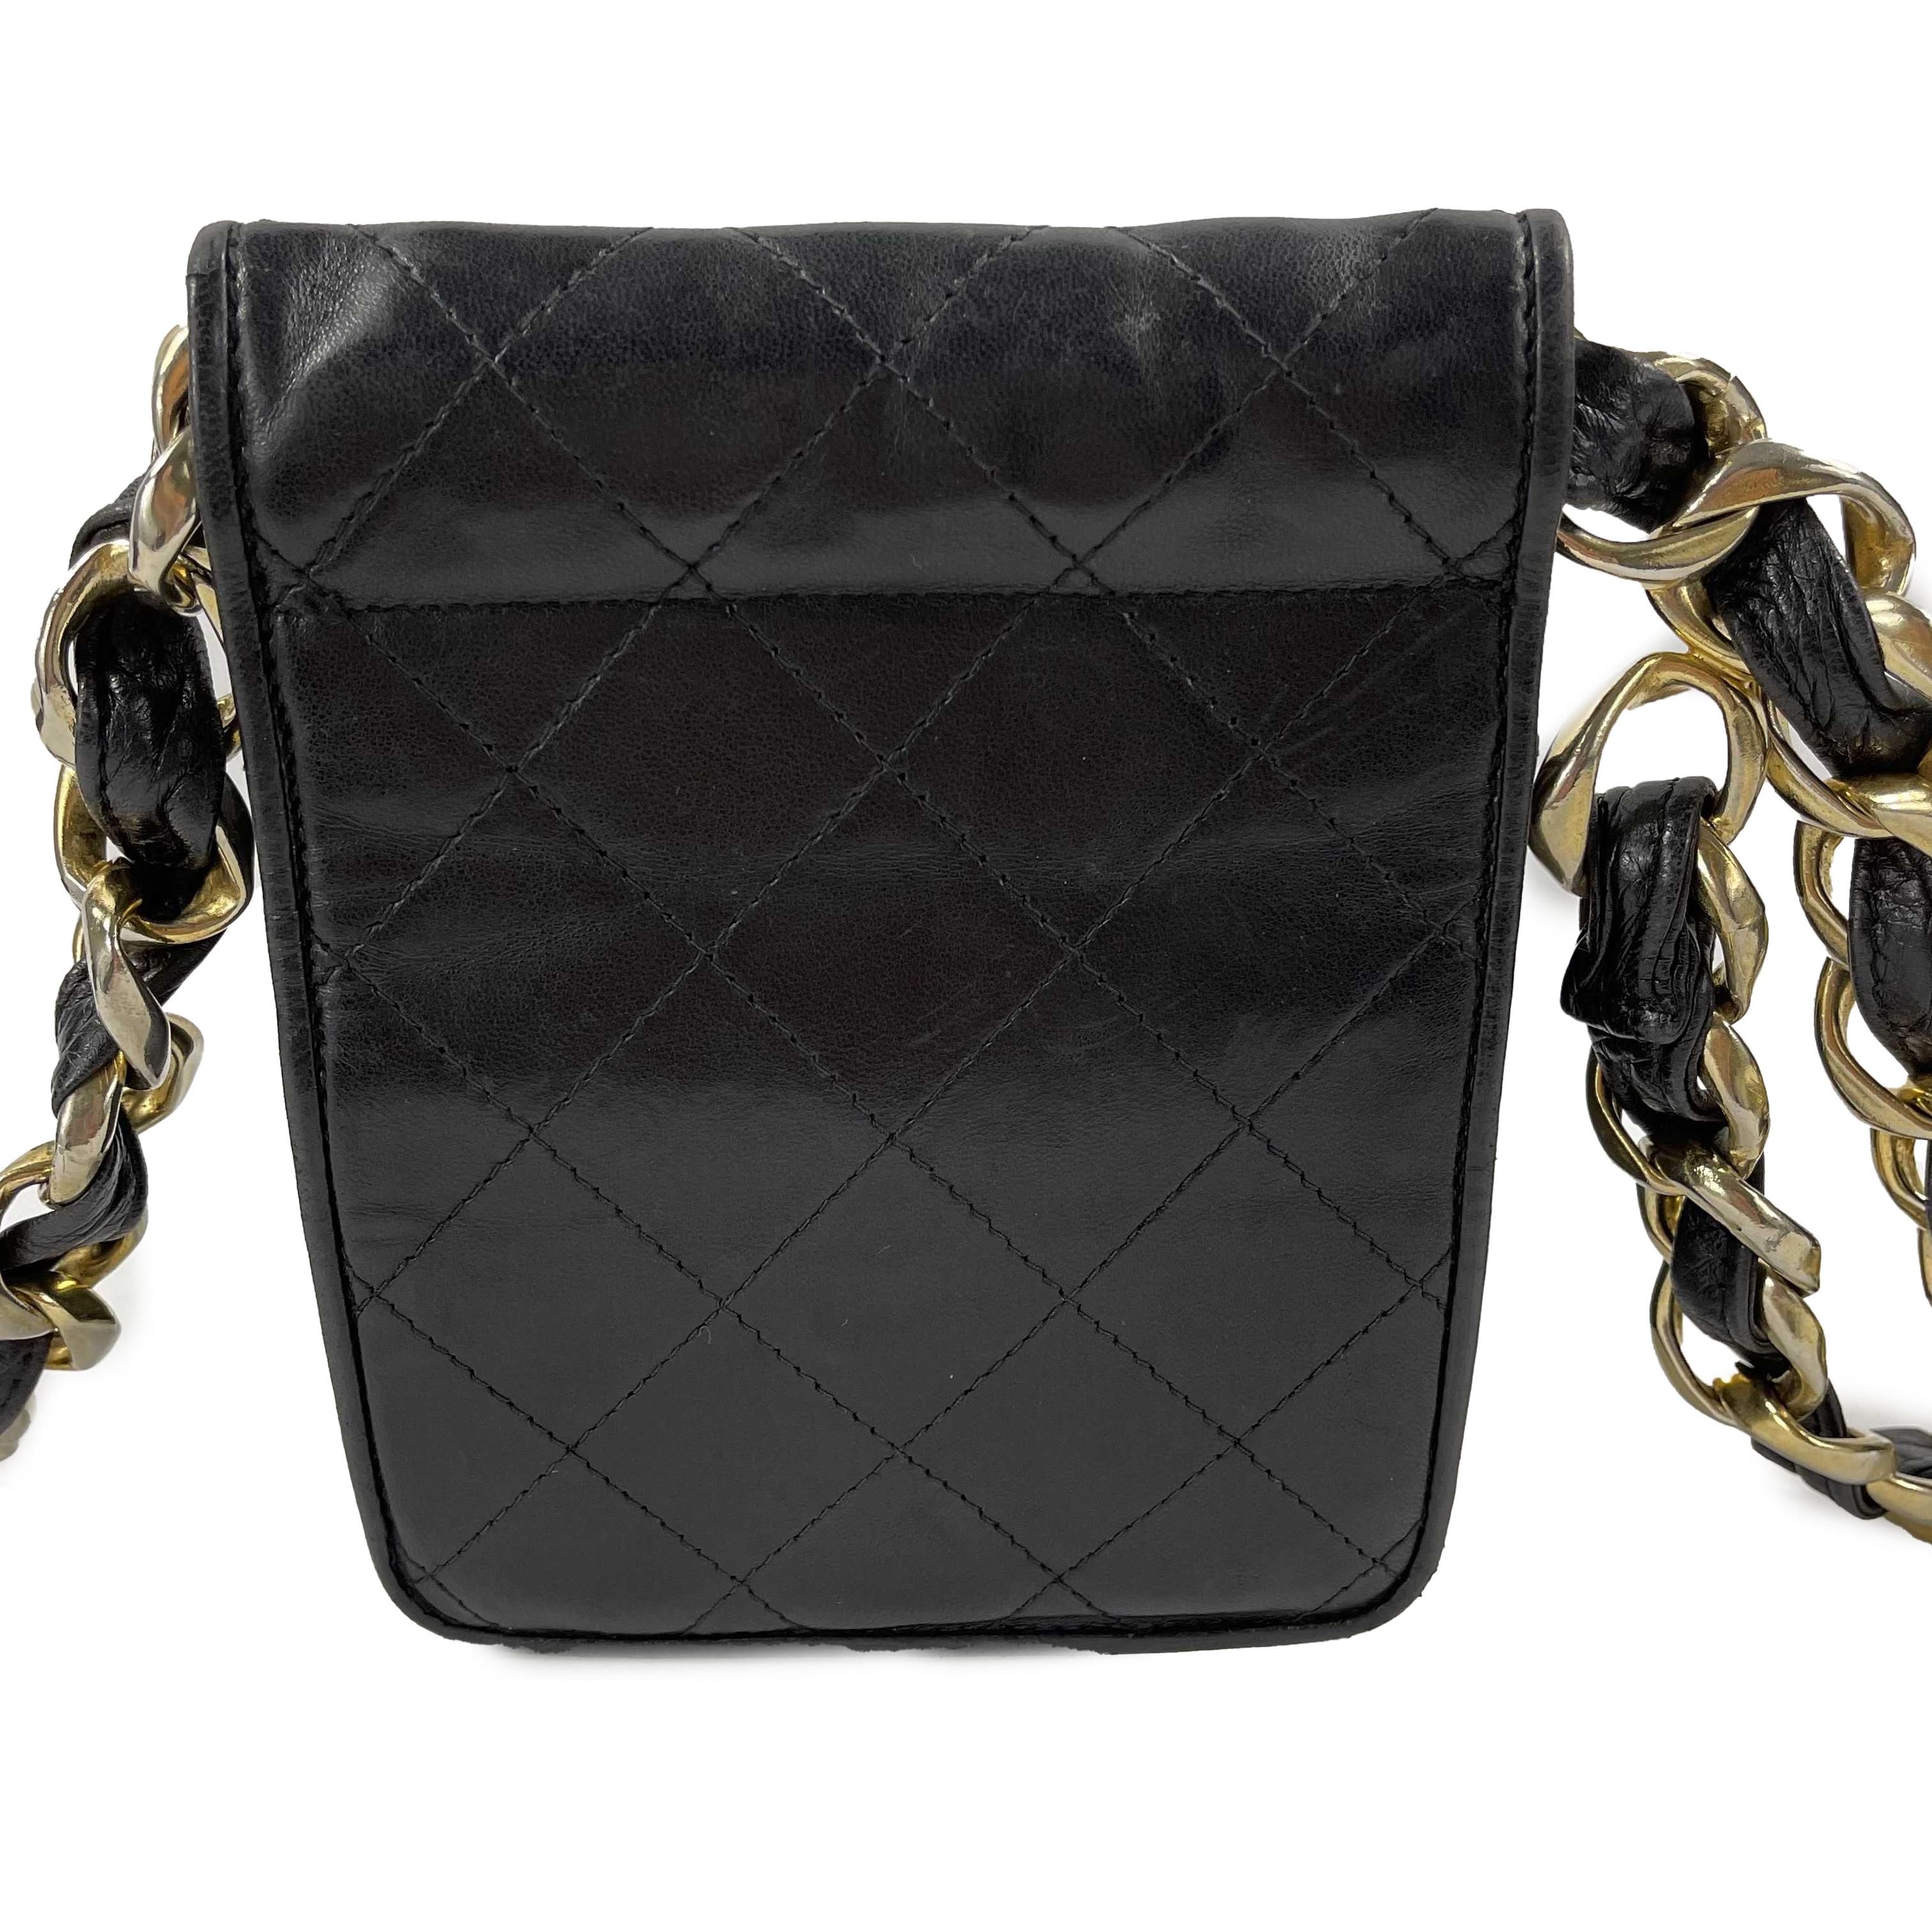 CHANEL - VTG 90s Black Quilted Leather CC Chain Belt Mini Bag / Fanny Pack 

Description

This Chanel belt bag was featured in an ad campaign on supermodel Claudia Schiffer in the early 1990's.
The bag is crafted with black quilted lambskin leather